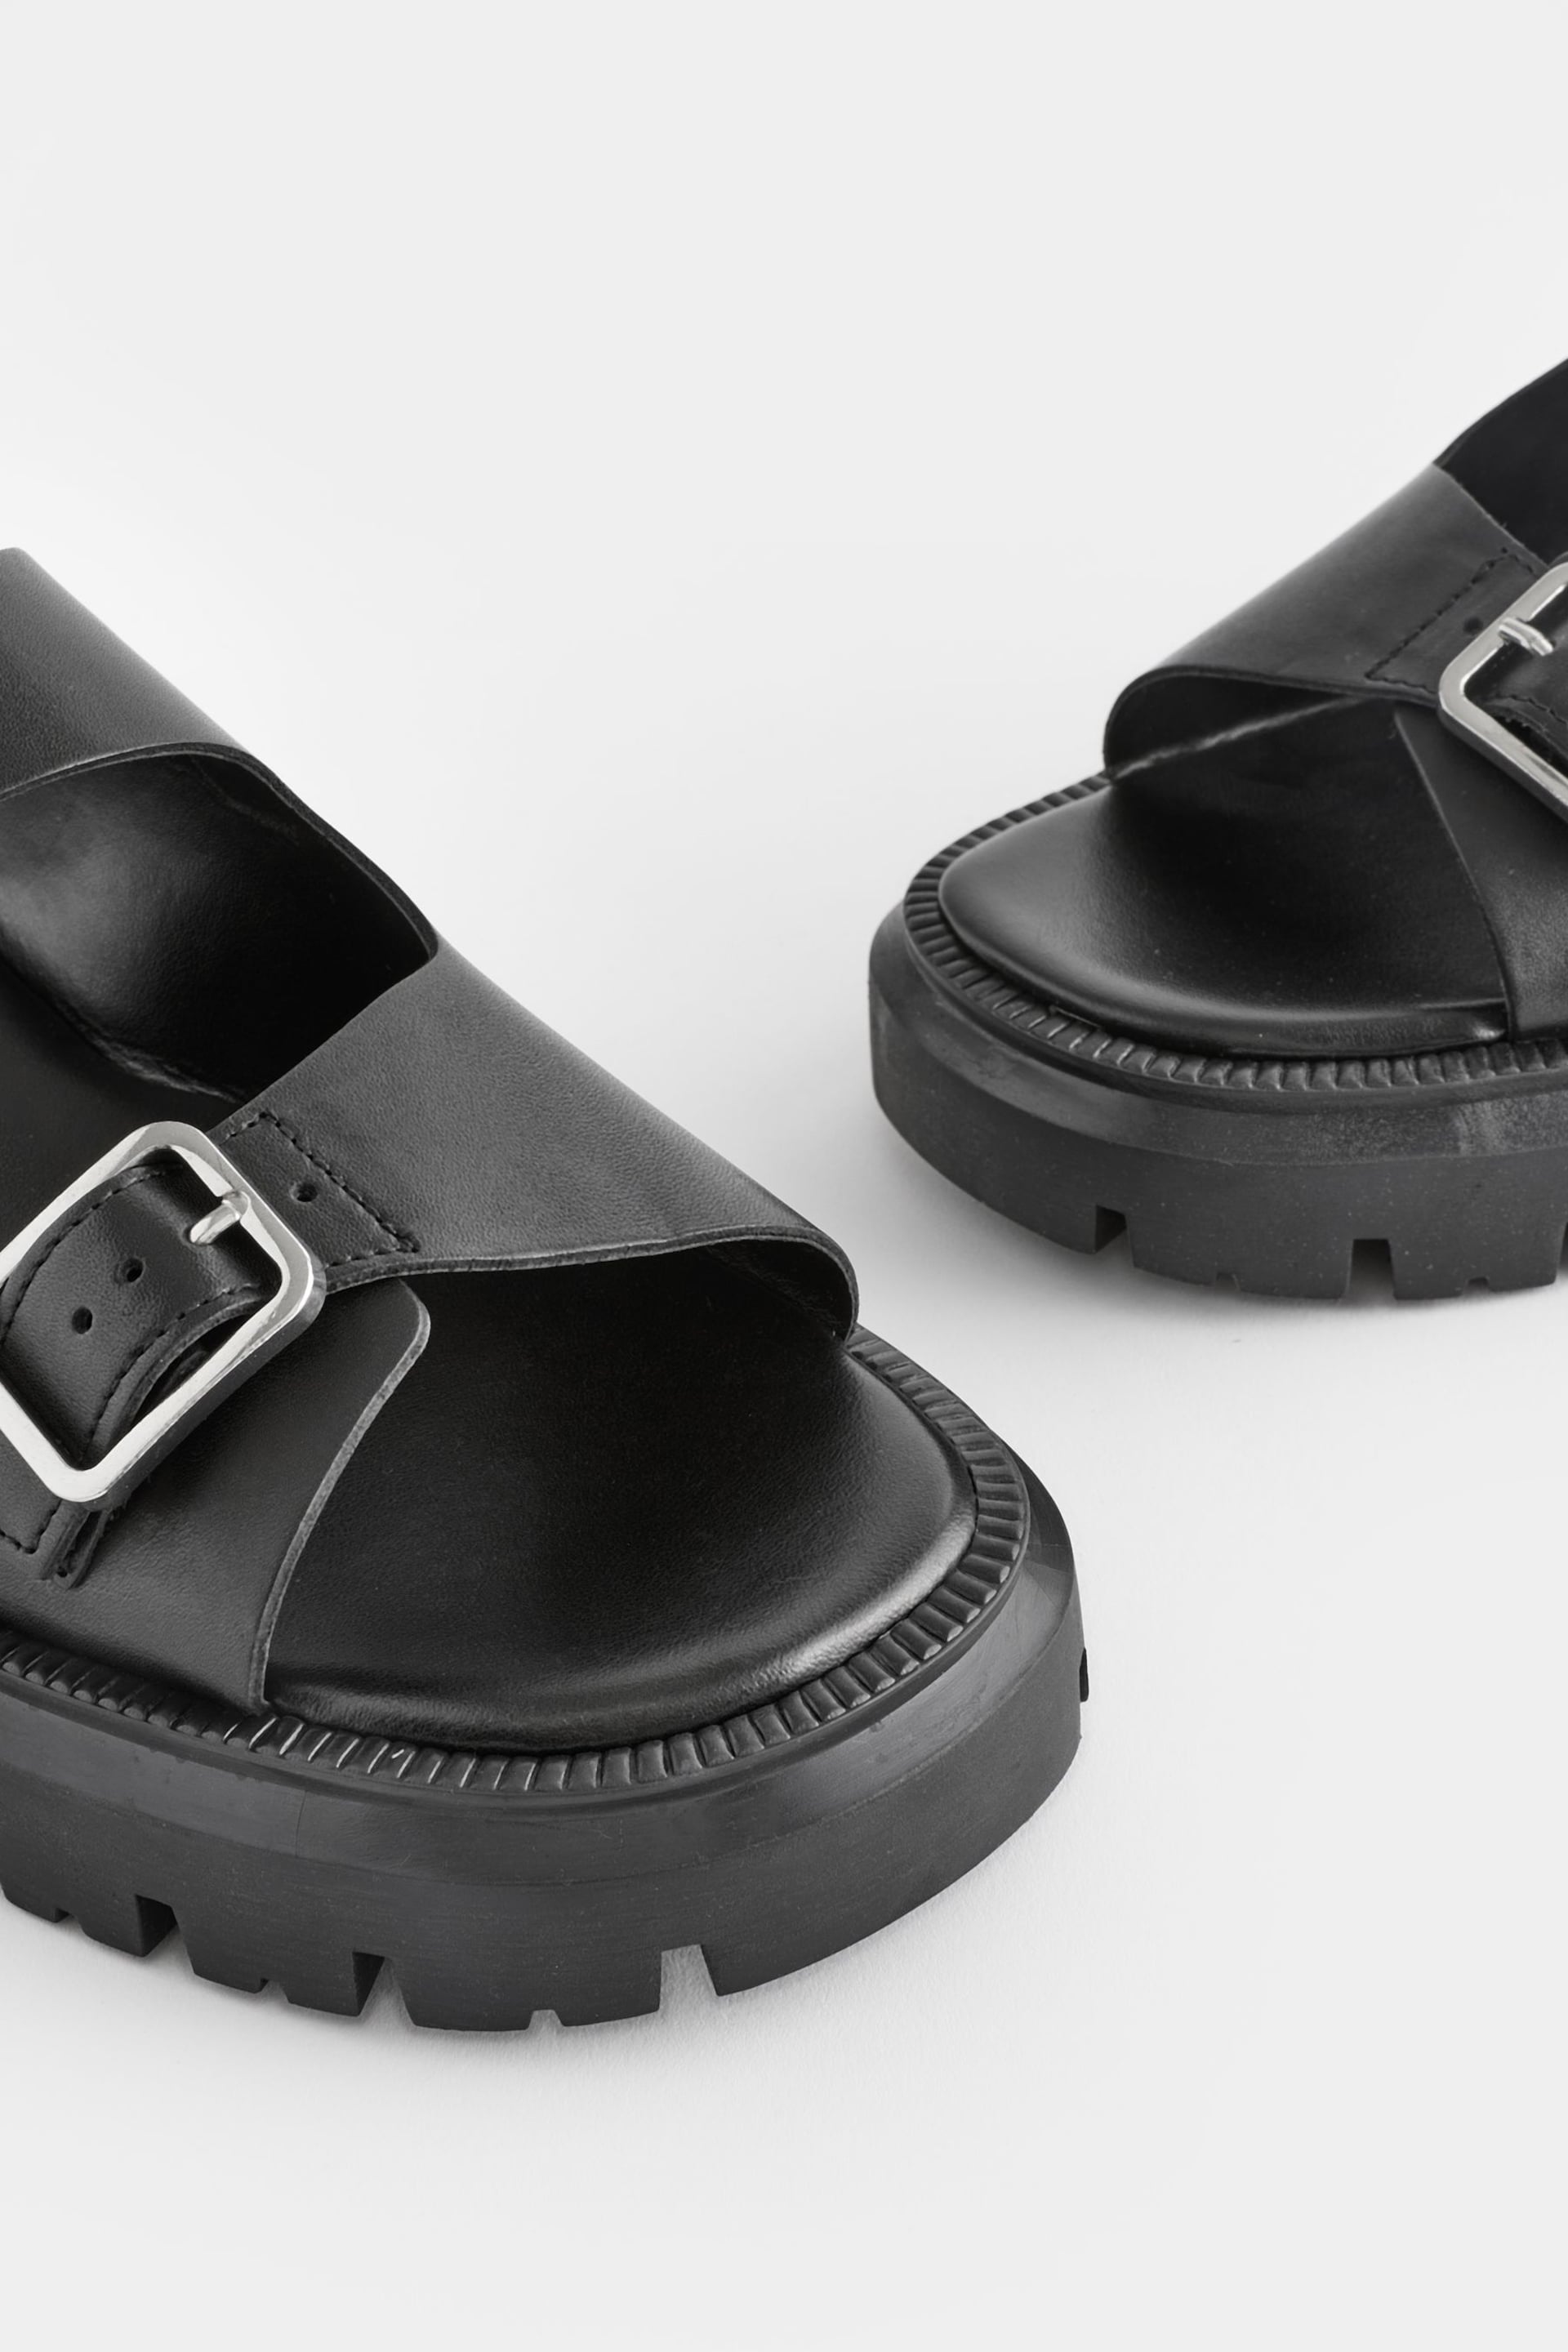 Black Regular/Wide Fit Premium Leather Chunky Cleated Sandals - Image 5 of 8